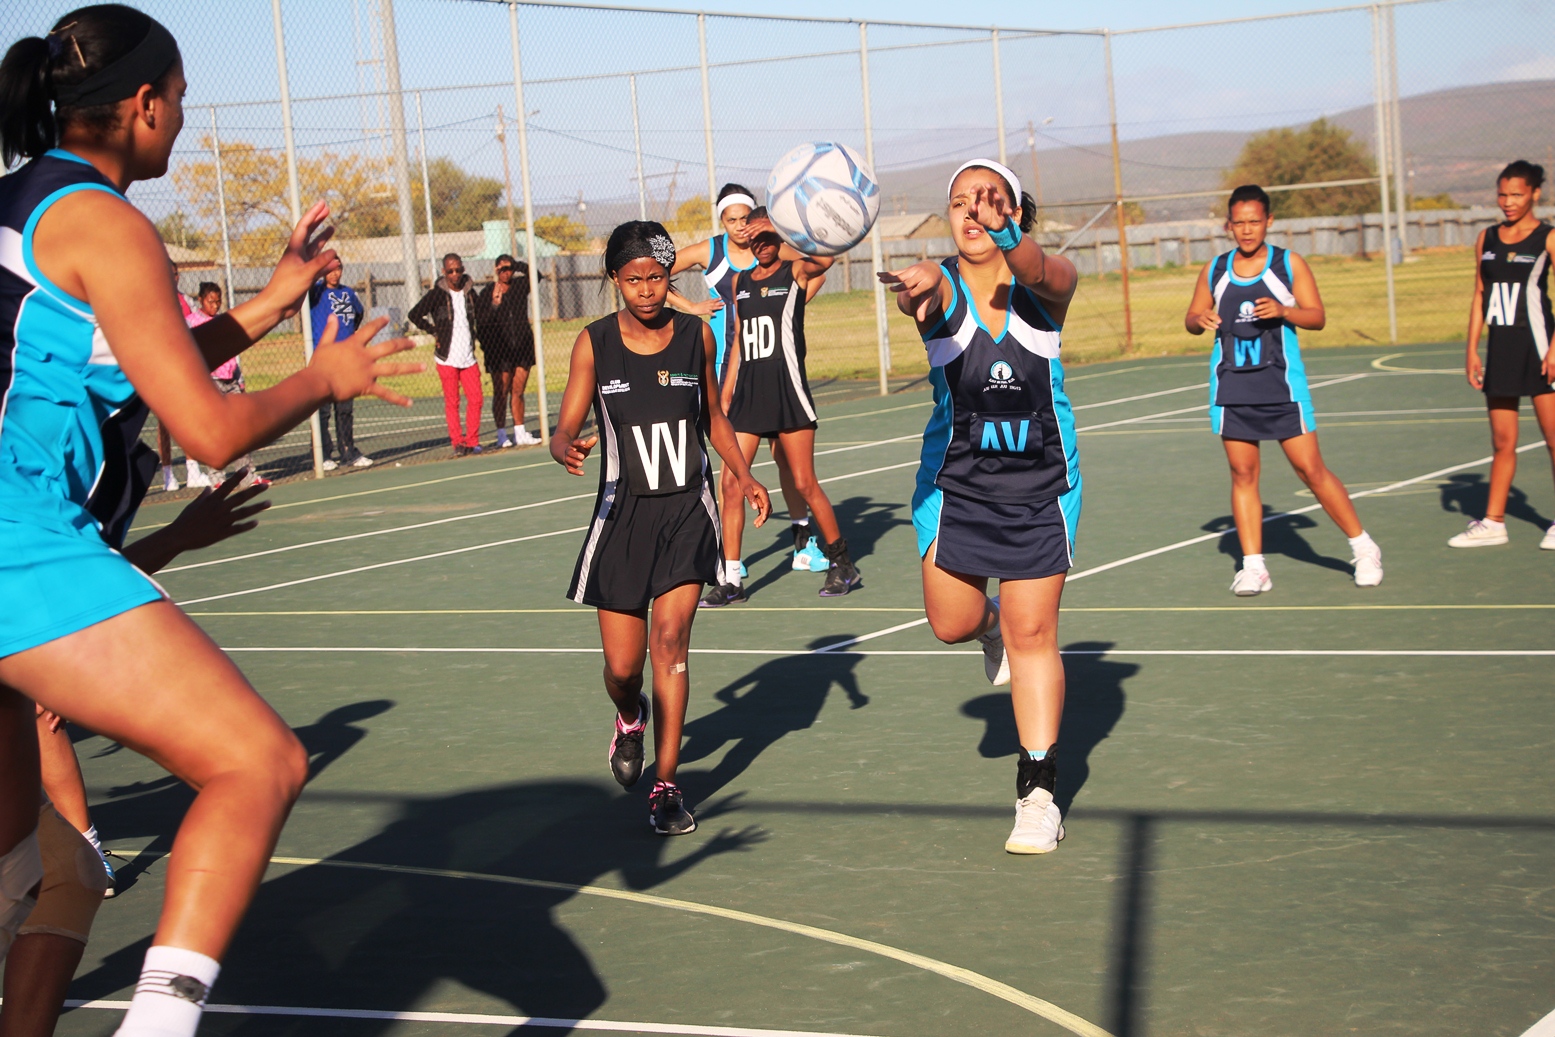 The netball games created excitement amongst players competing at the Festival.